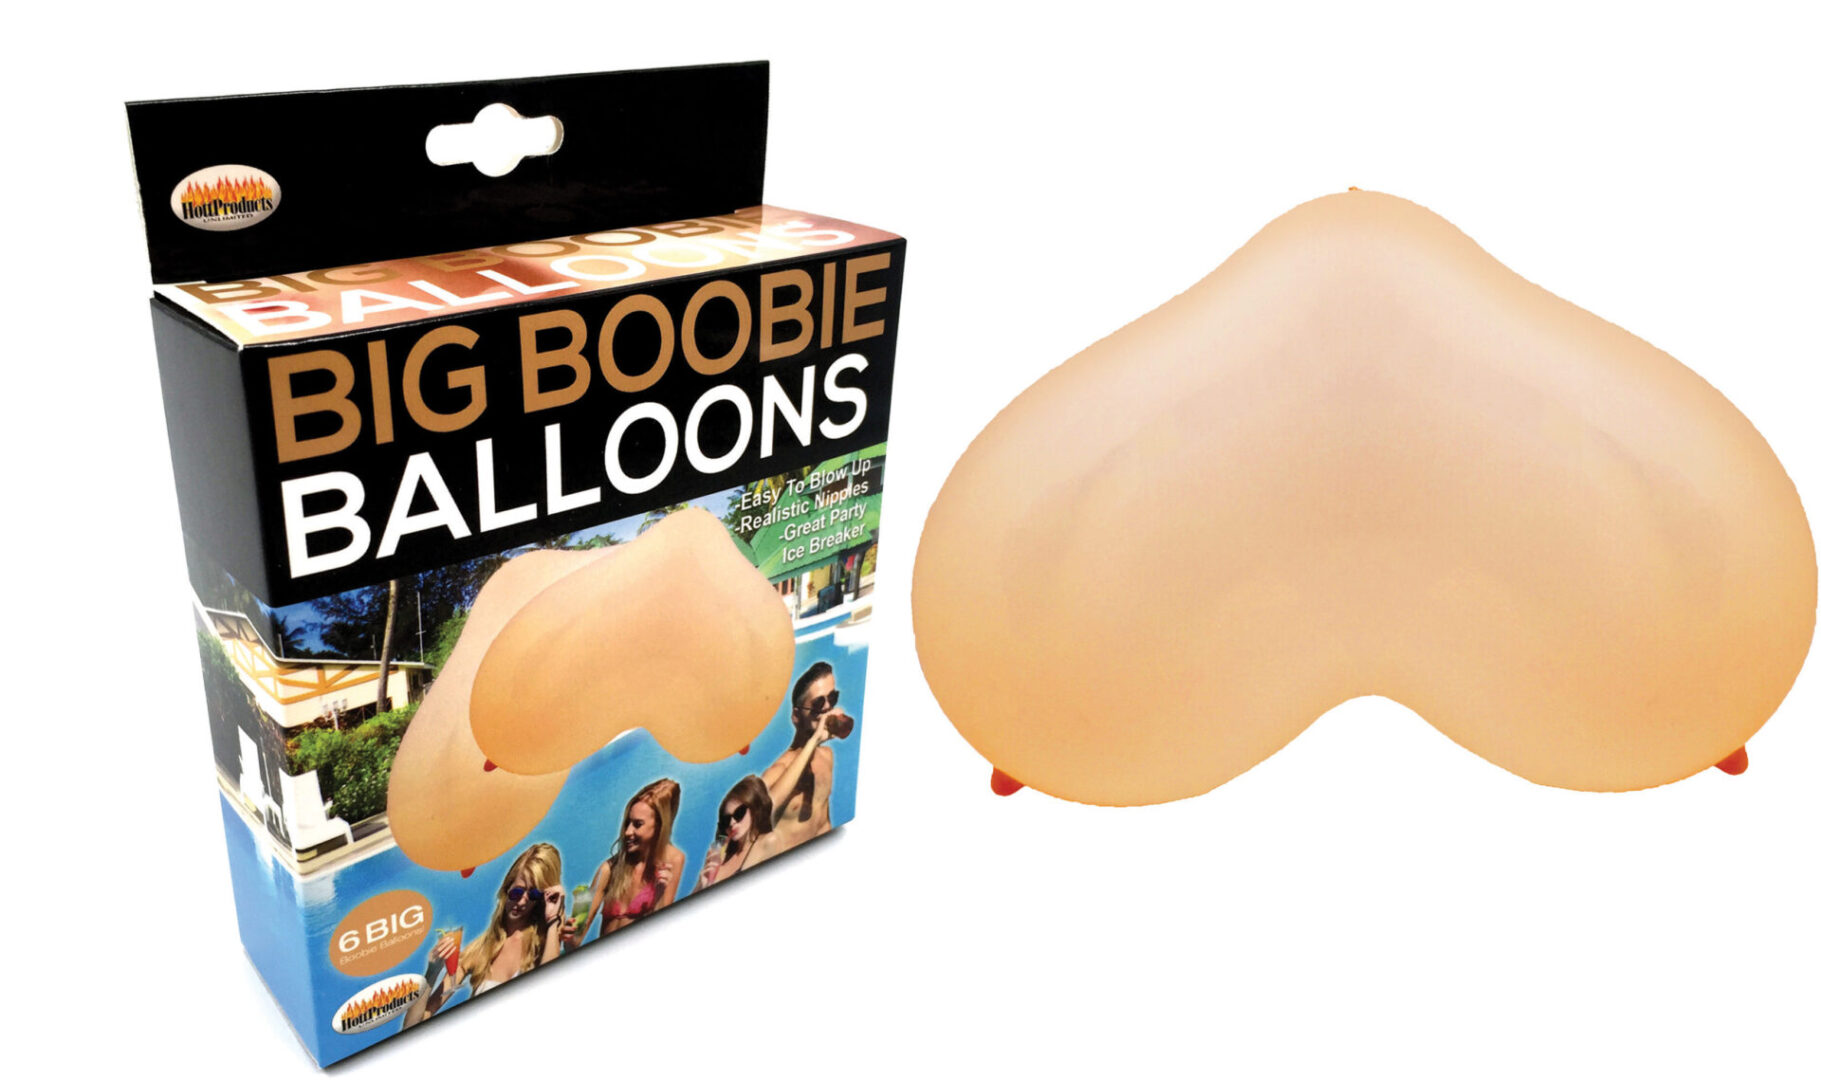 Big Boobie Balloons Packet for party